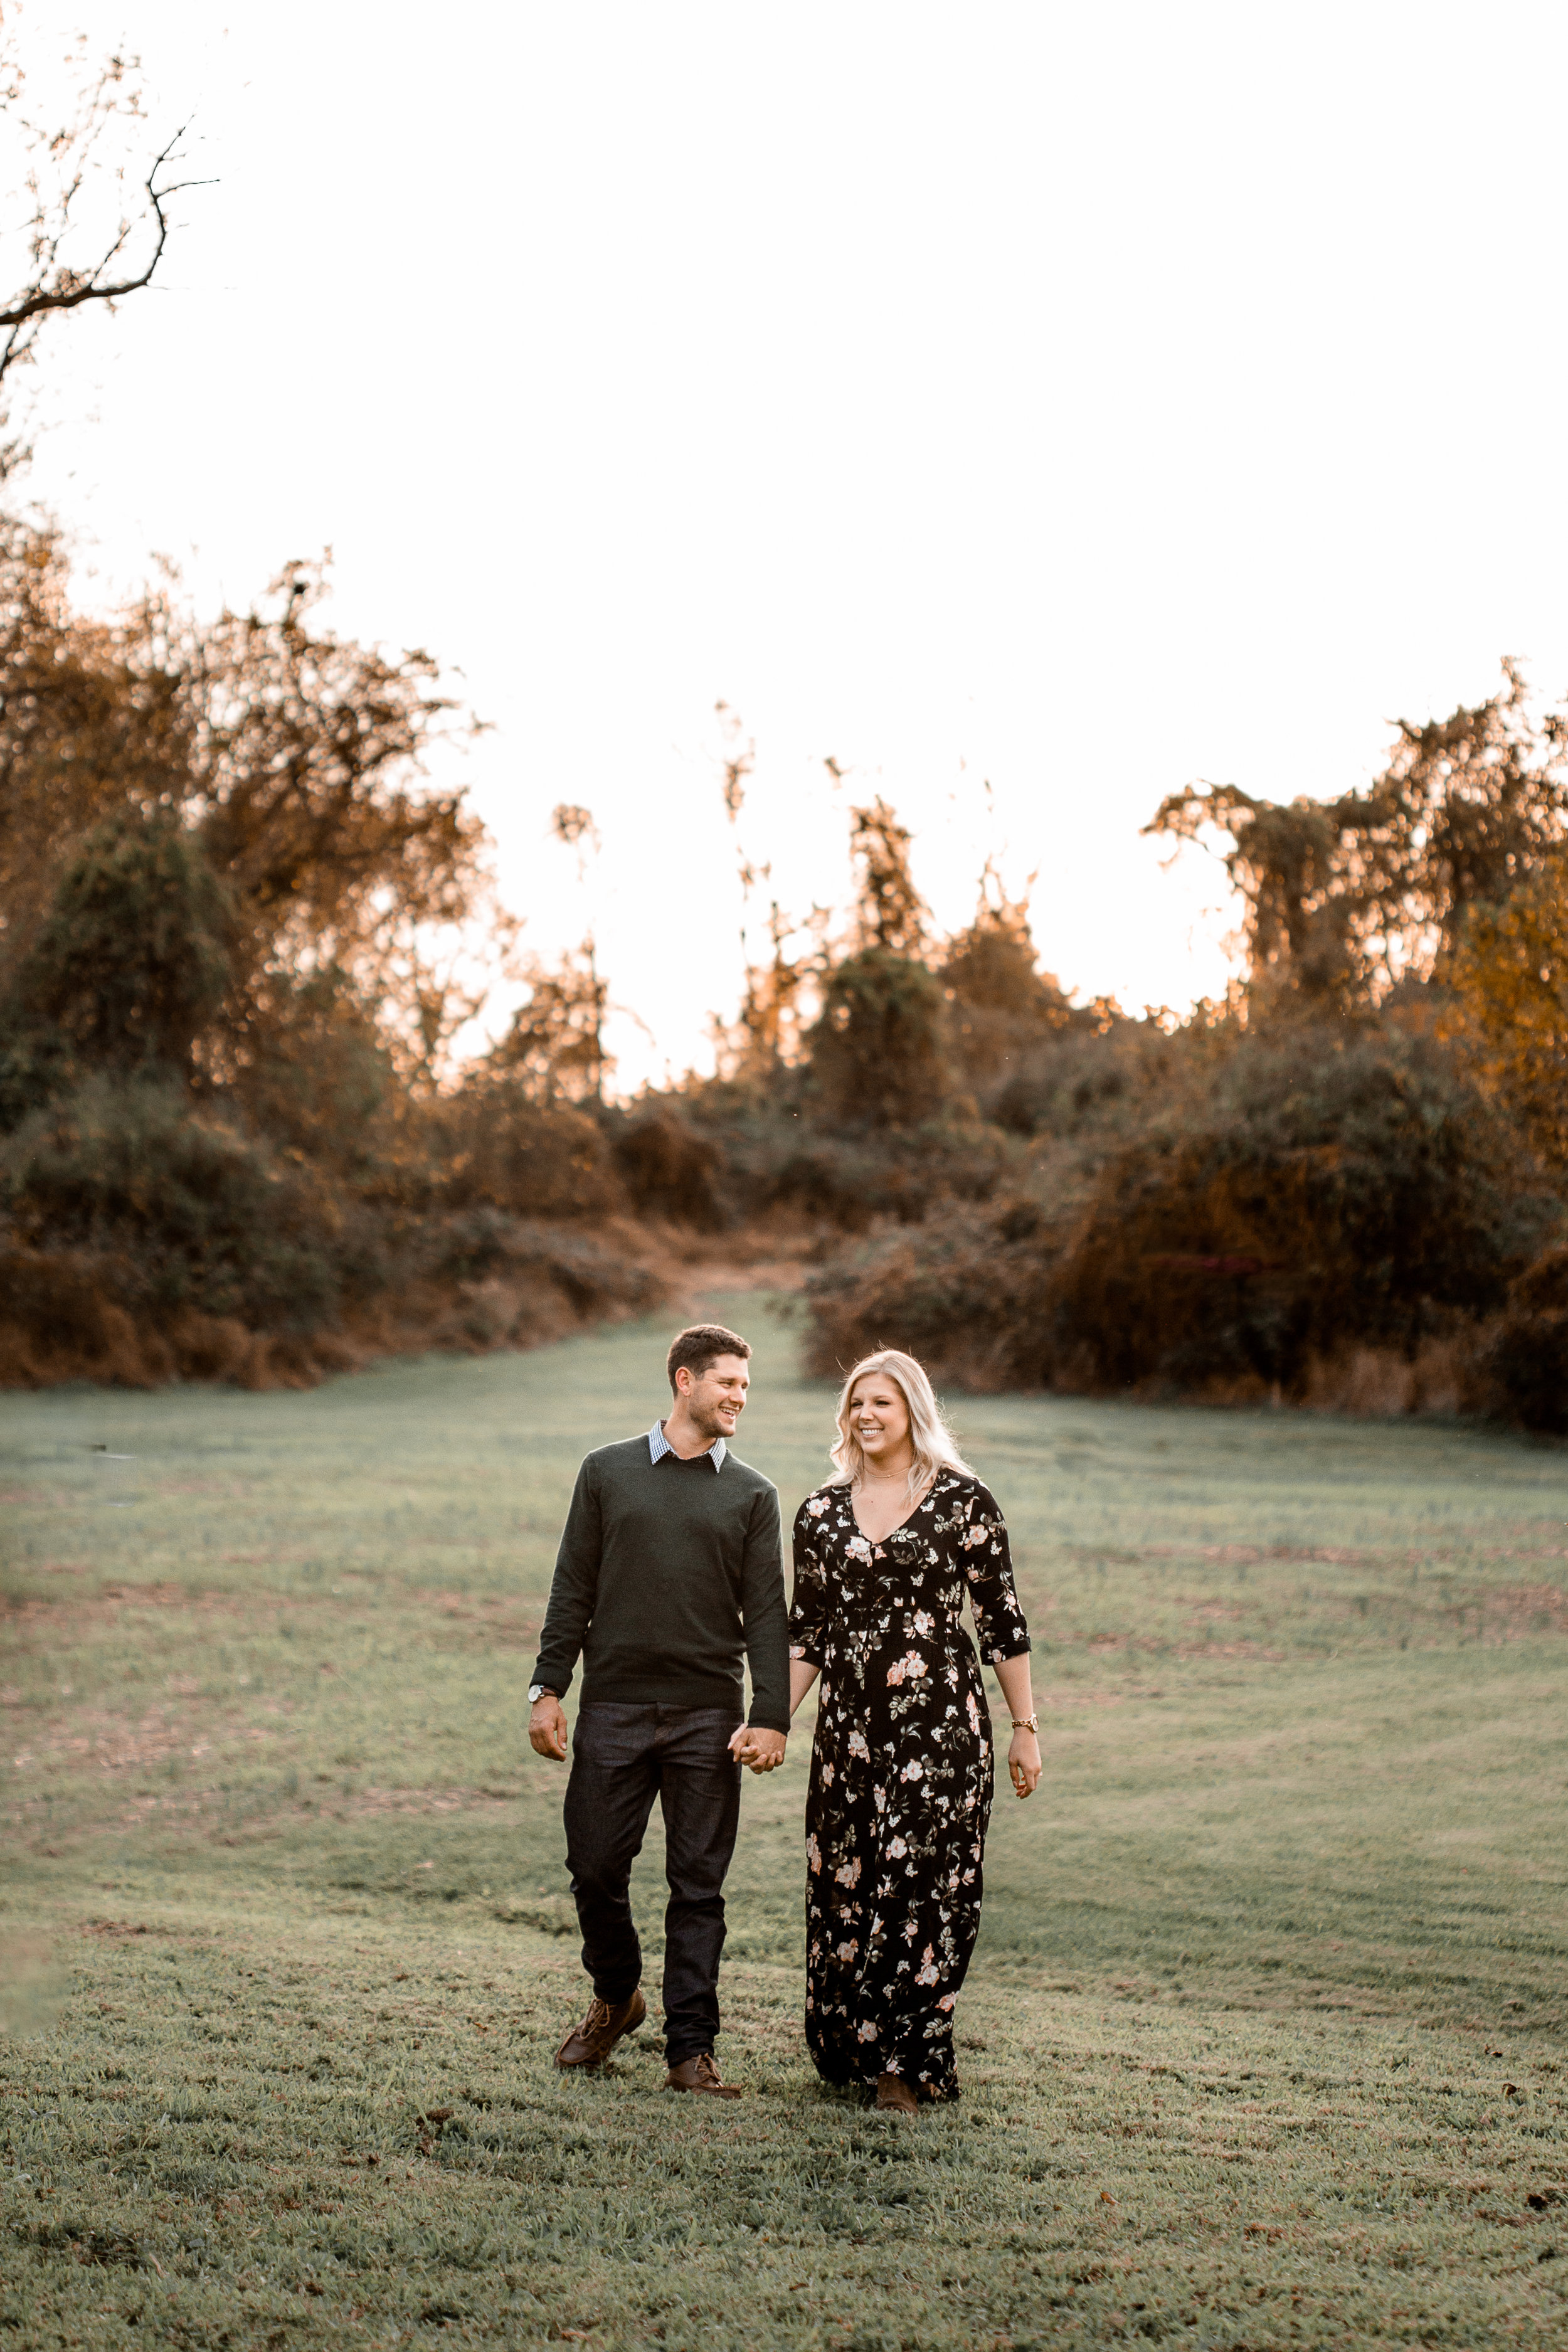 nicole-daacke-photography-carefree-bohemian-lancaster-pa-pennsylvania-engagement-photos-engagement-session-golden-sunset-adventure-session-in-lancaster-pa-lancaster-pa-outdoor-wedding-photographer-1.jpg